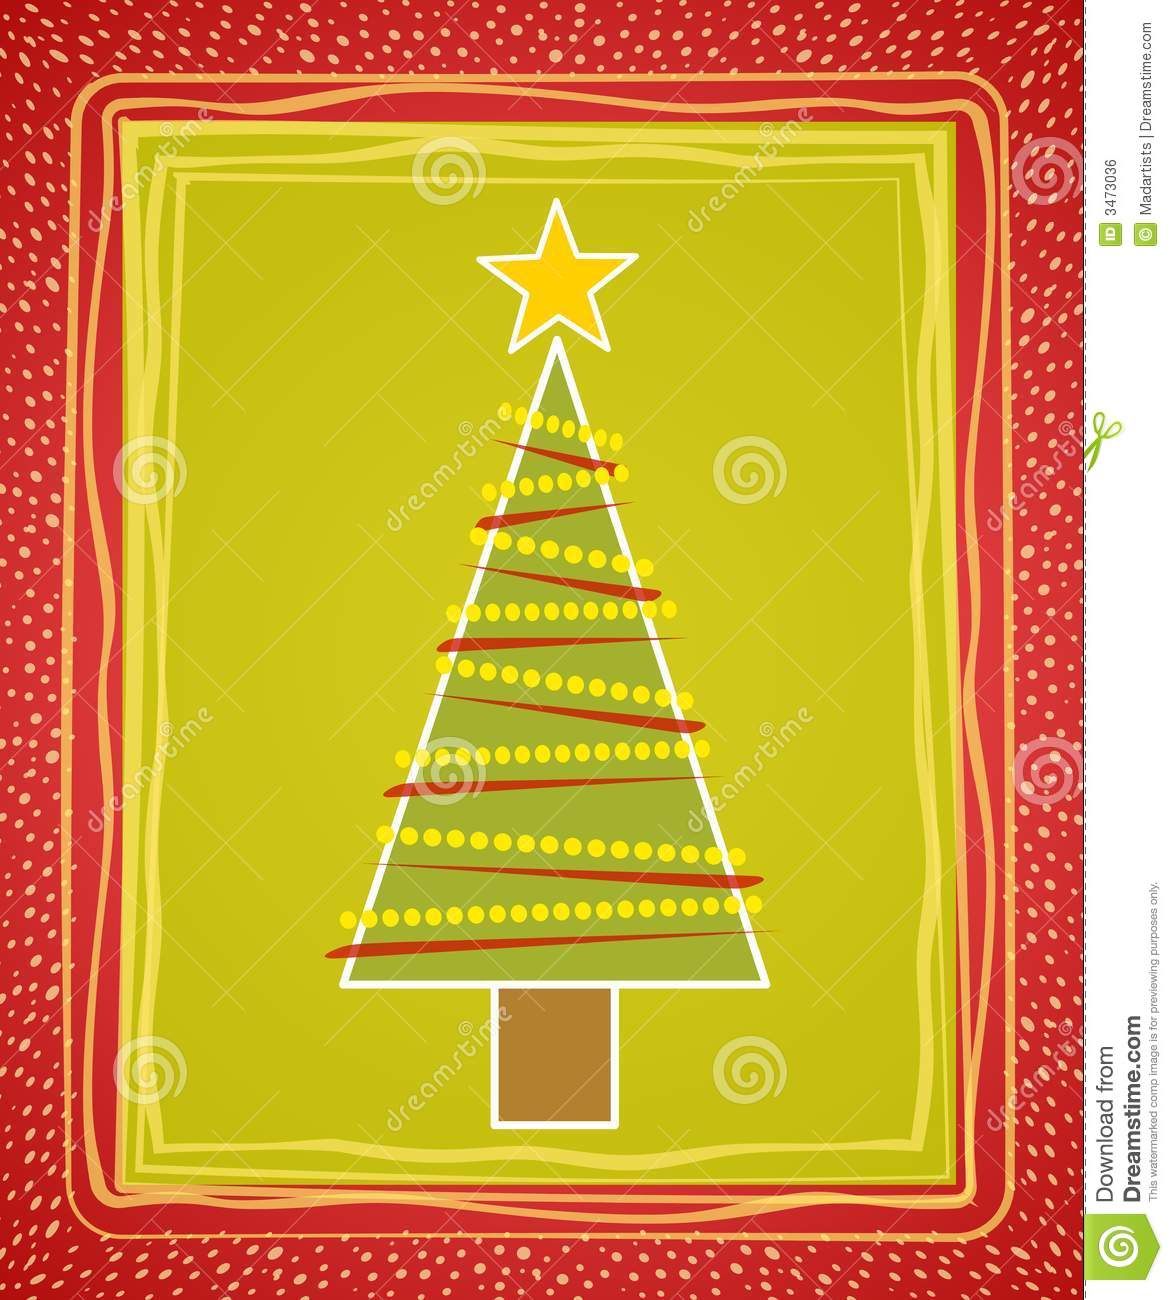 Clip Art Illustration Featuring A Simple Christmas Tree Design On